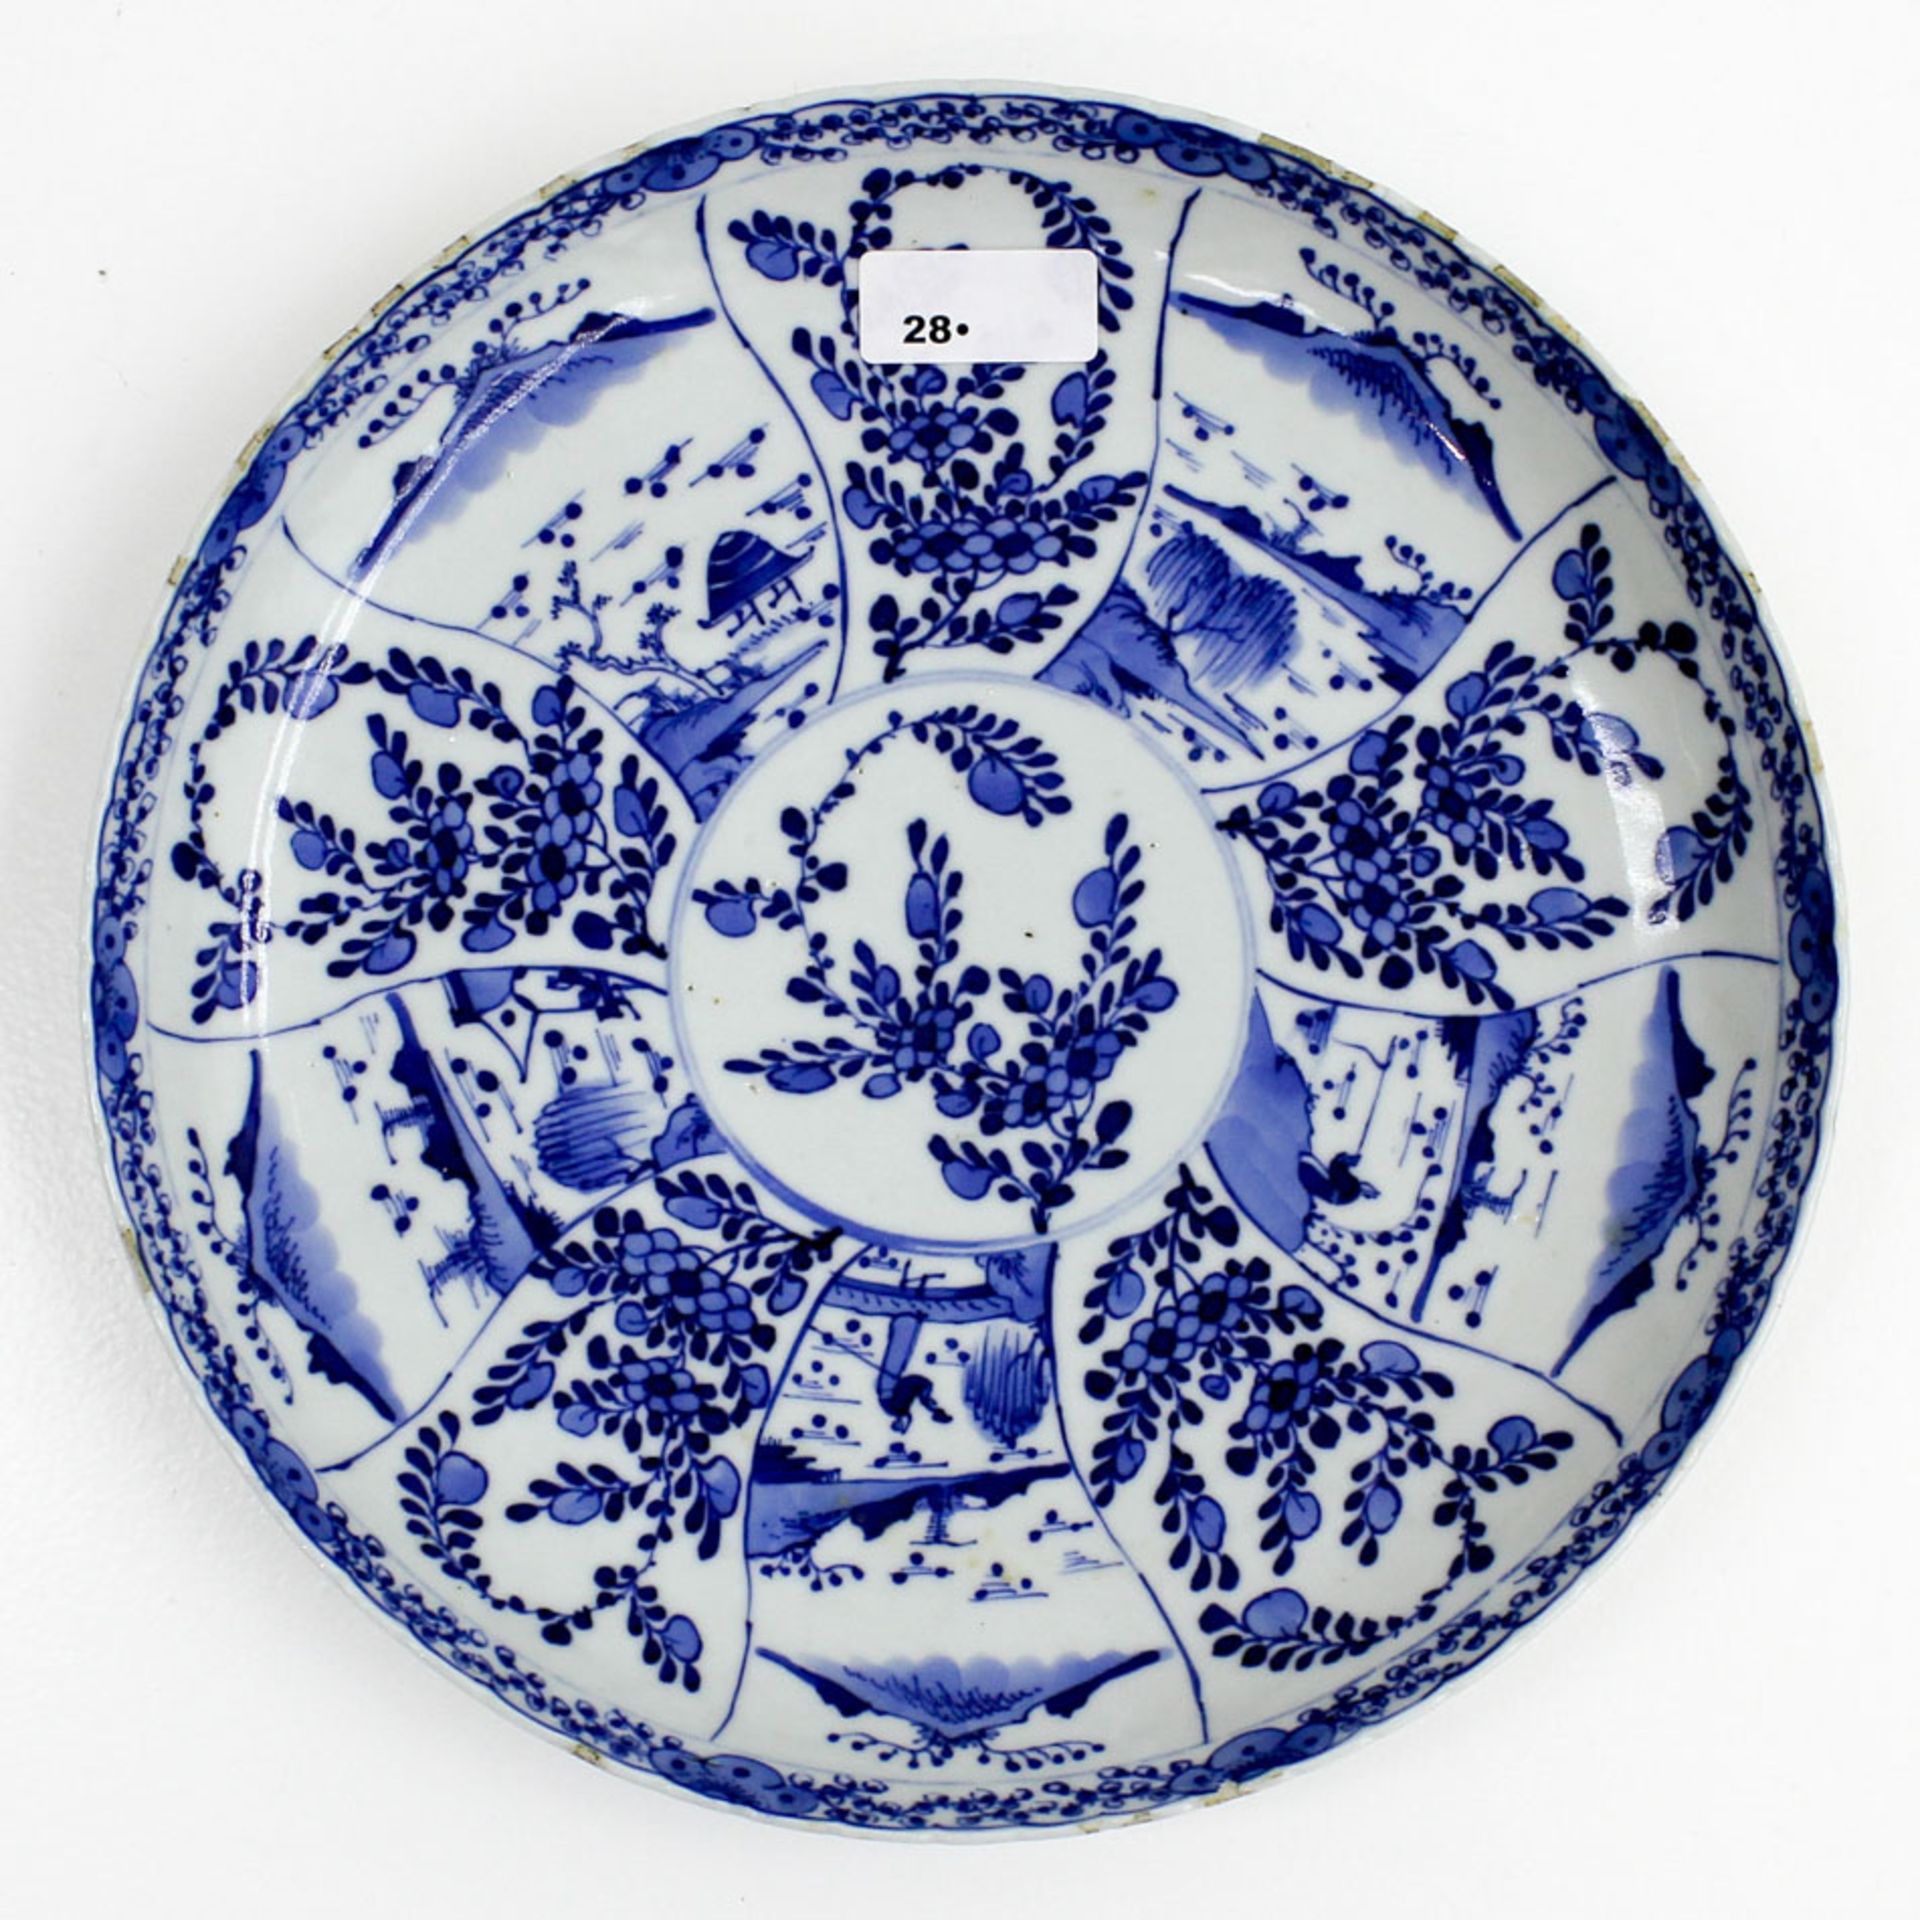 18th Century China Porcelain Plate Bottom marked with double ring and 4 Chinese characters, 25 cm in